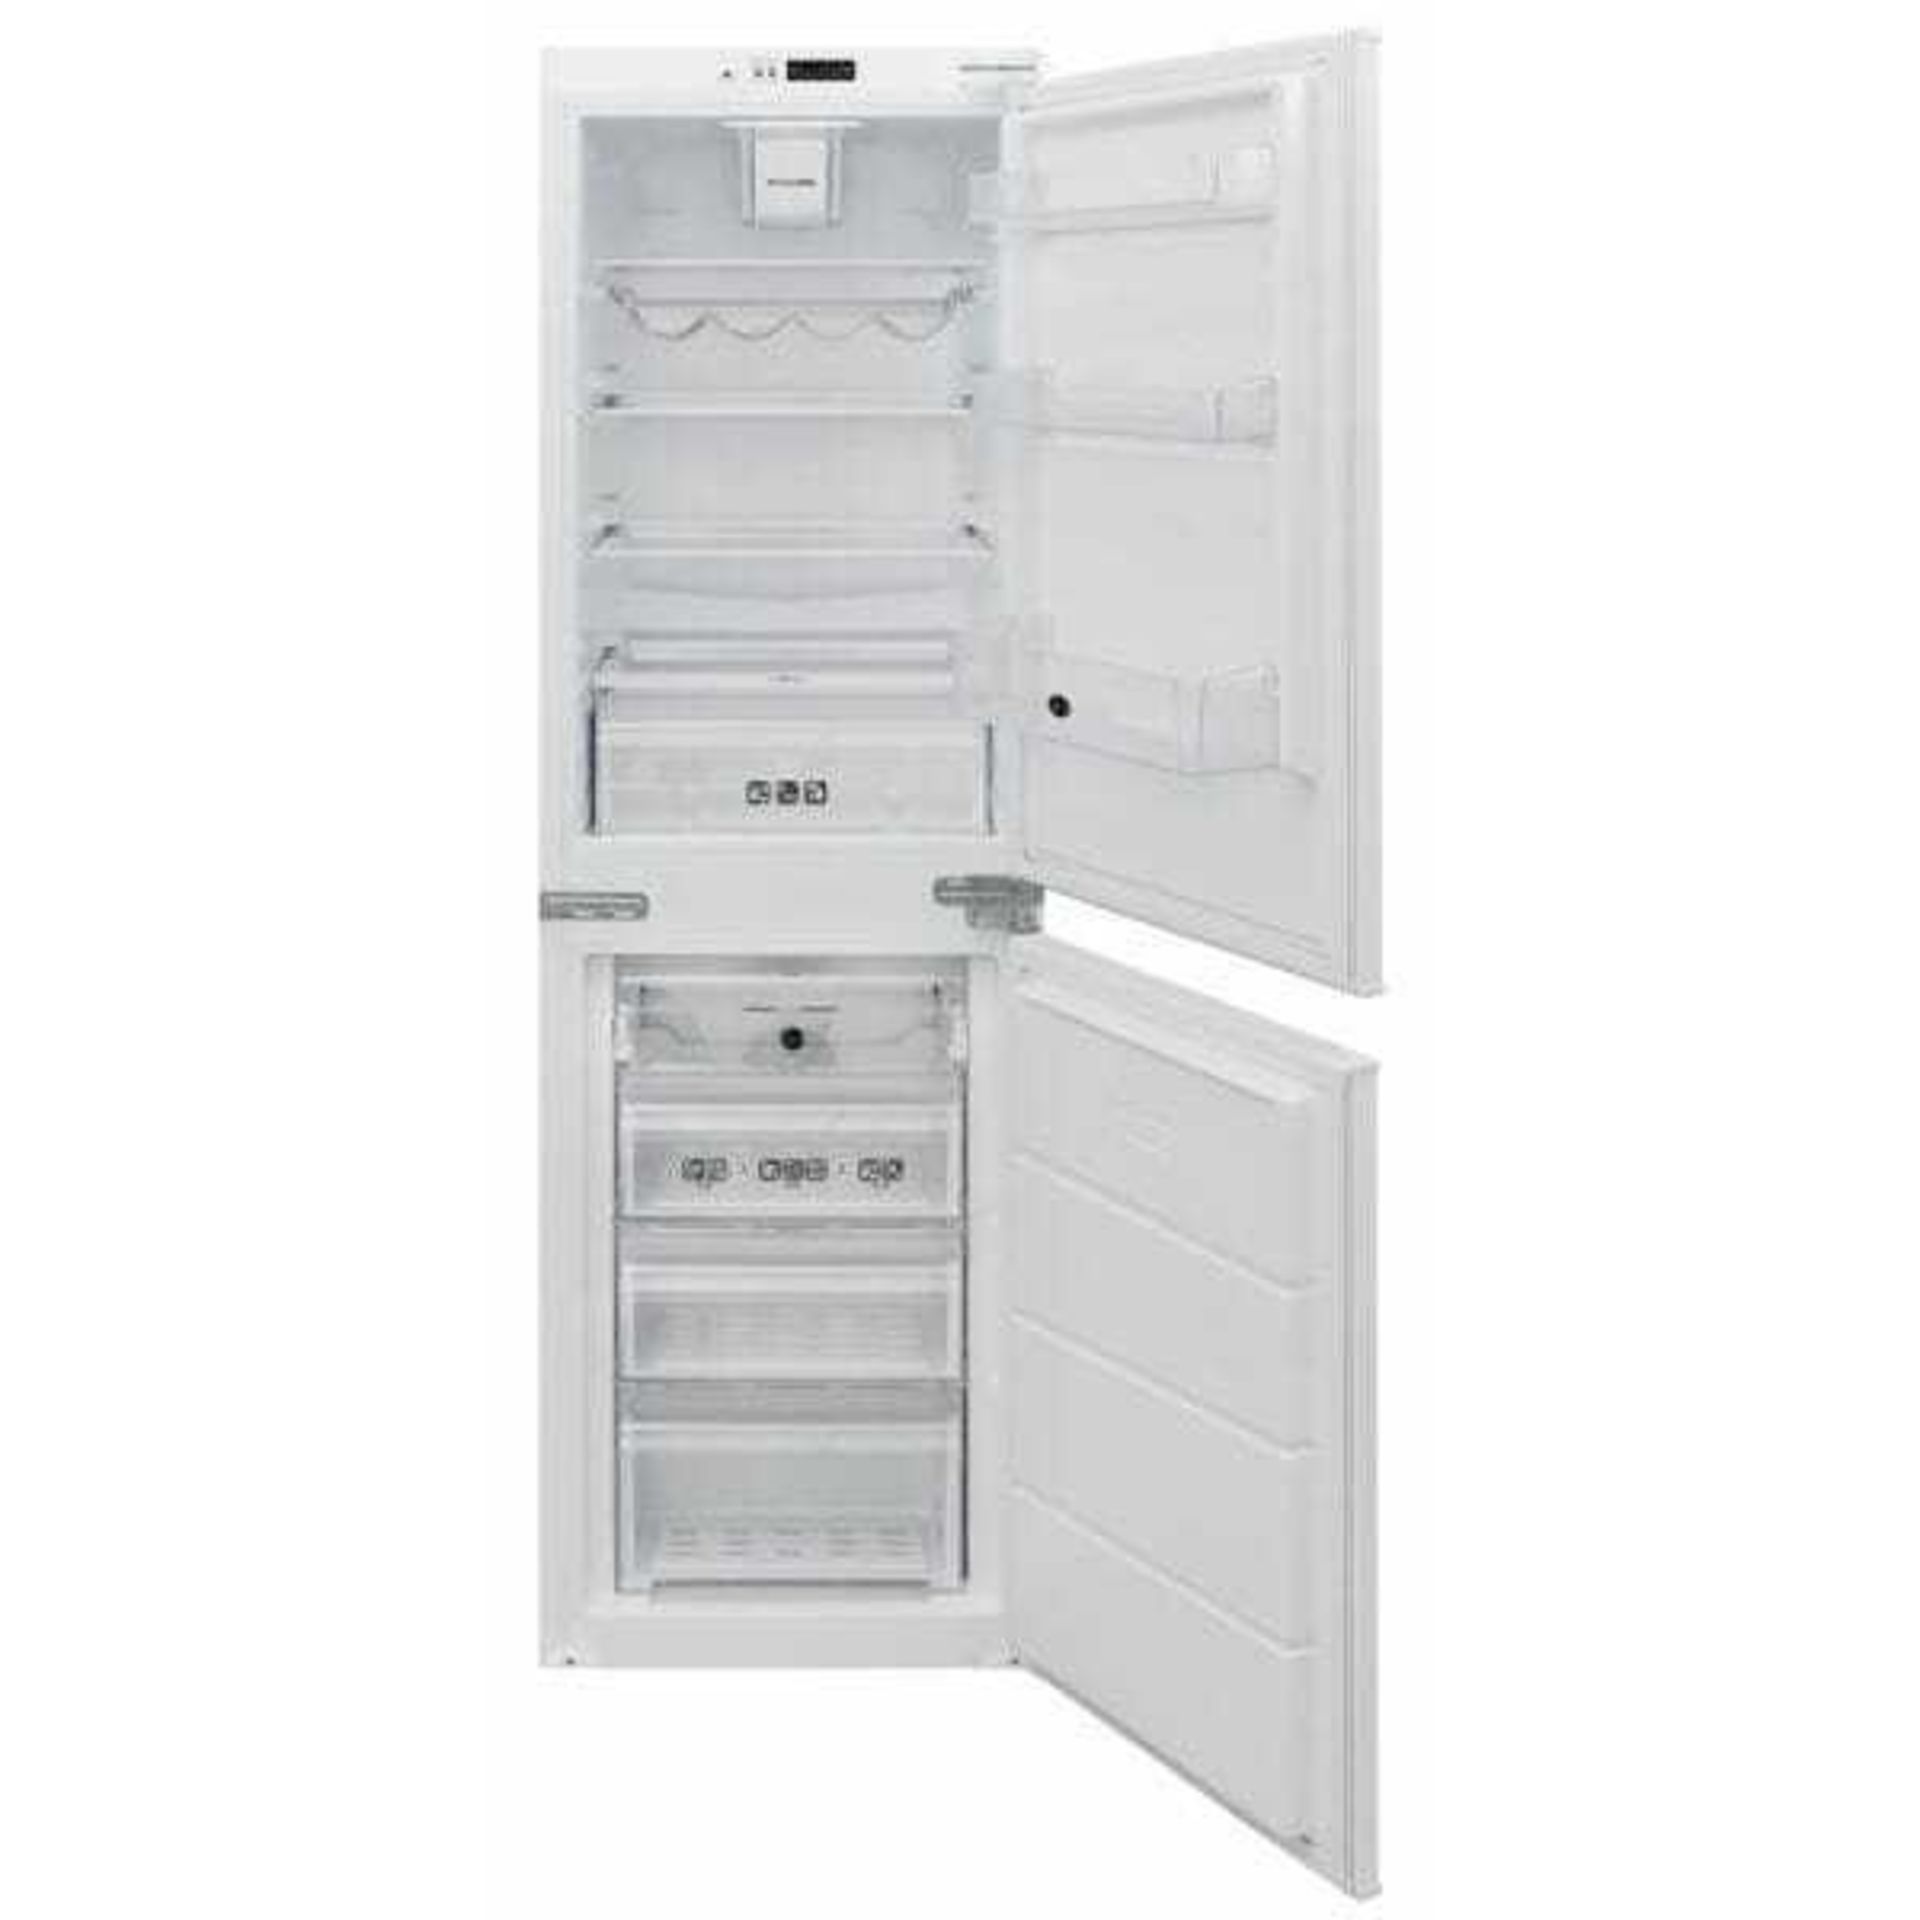 (Sp) RRP £290 Lot To Contain 1 Integrated Fridge Freezer